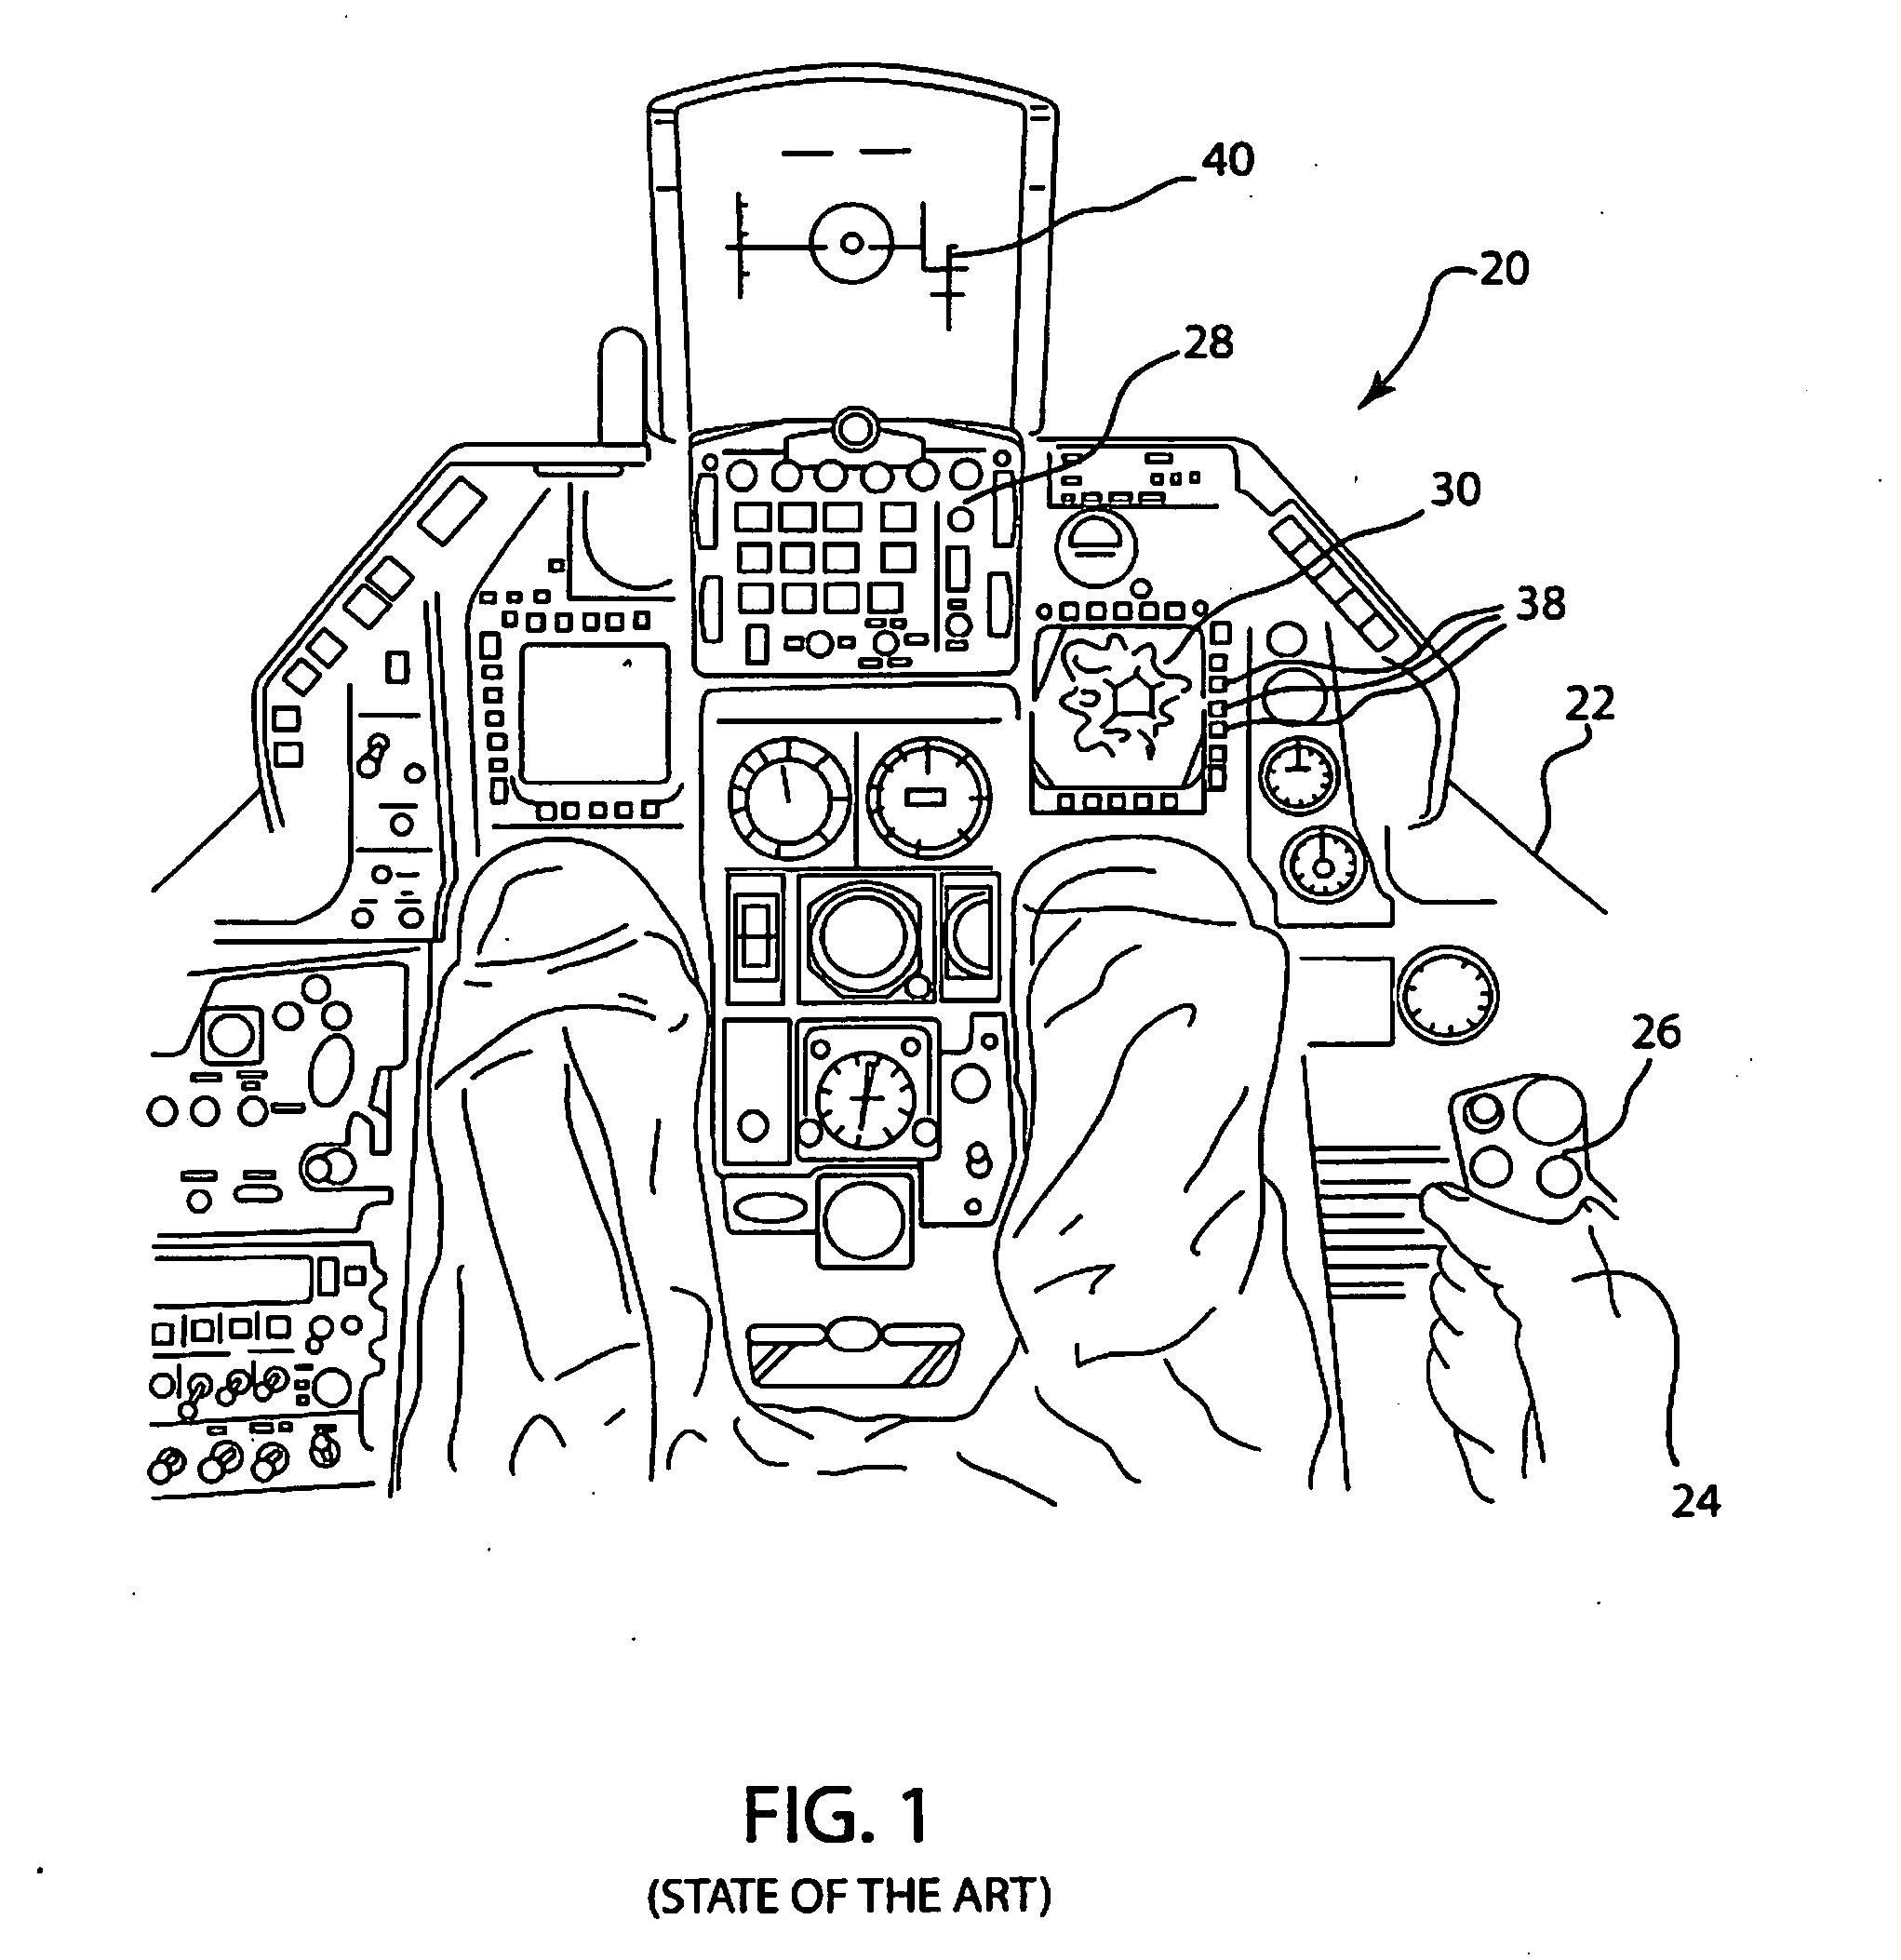 Method for reconditioning fcr apg-68 tactical radar units